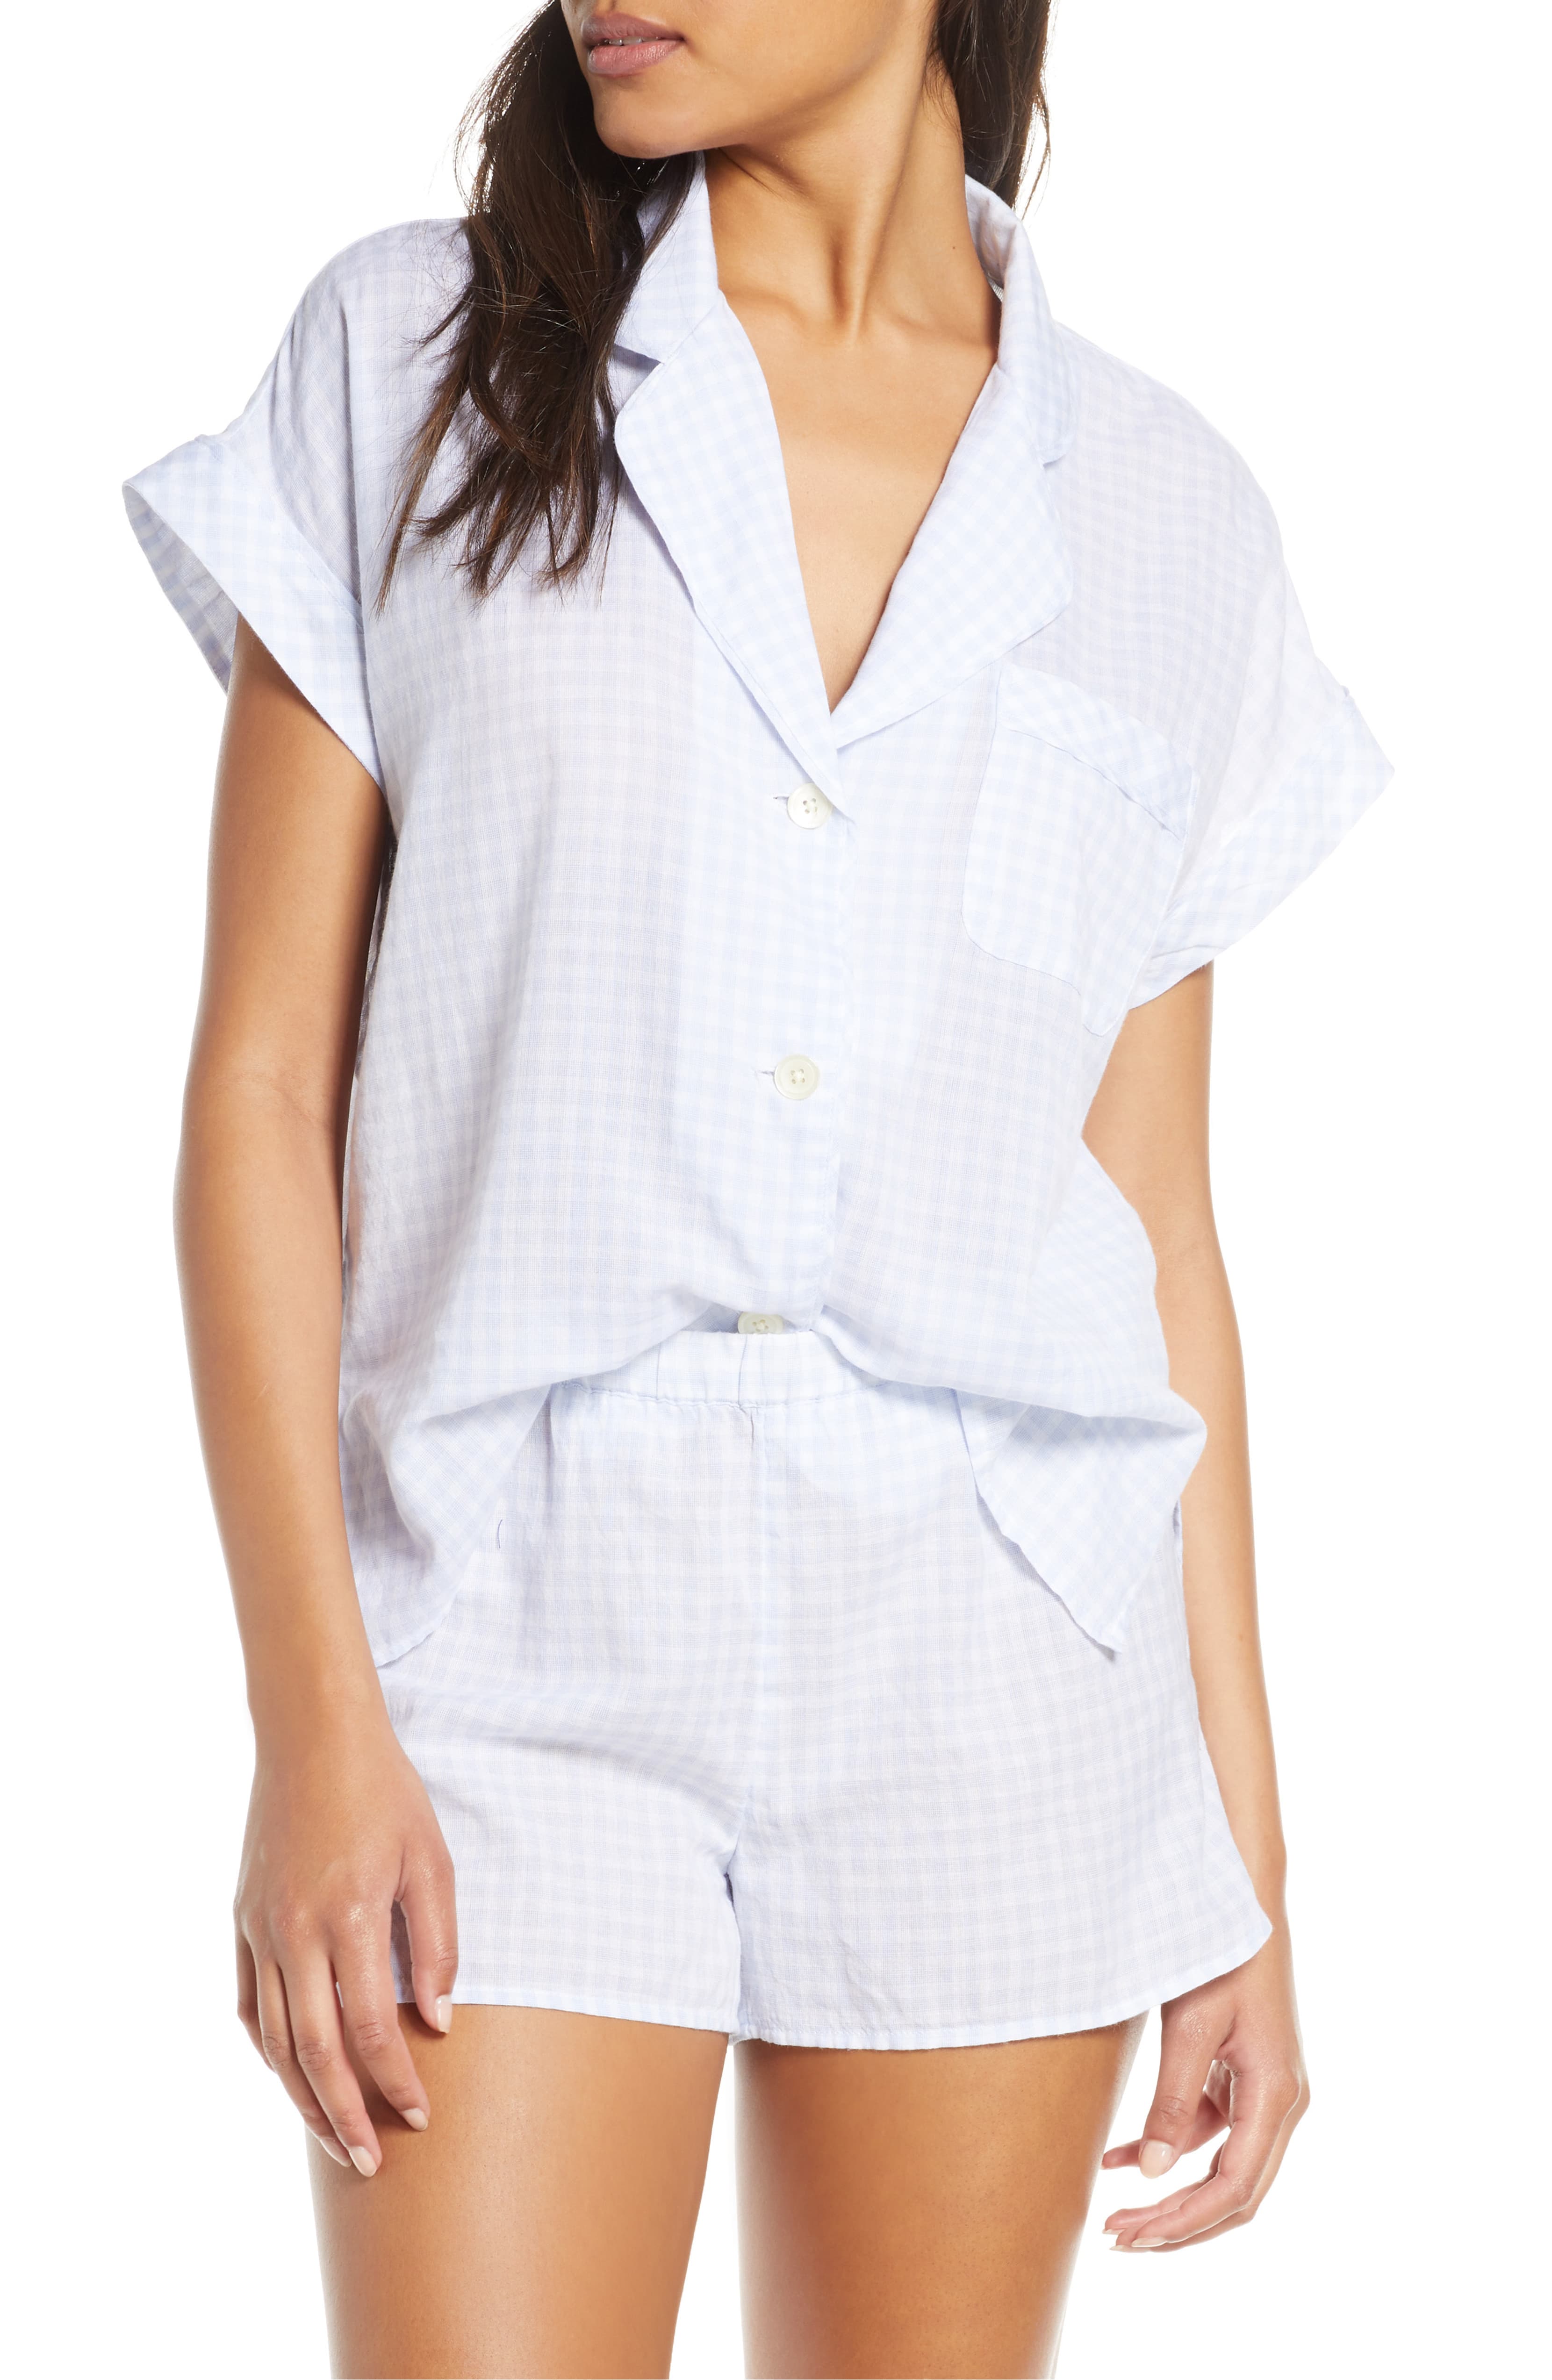 Gingham Bedtime Pajama Top and Bottoms